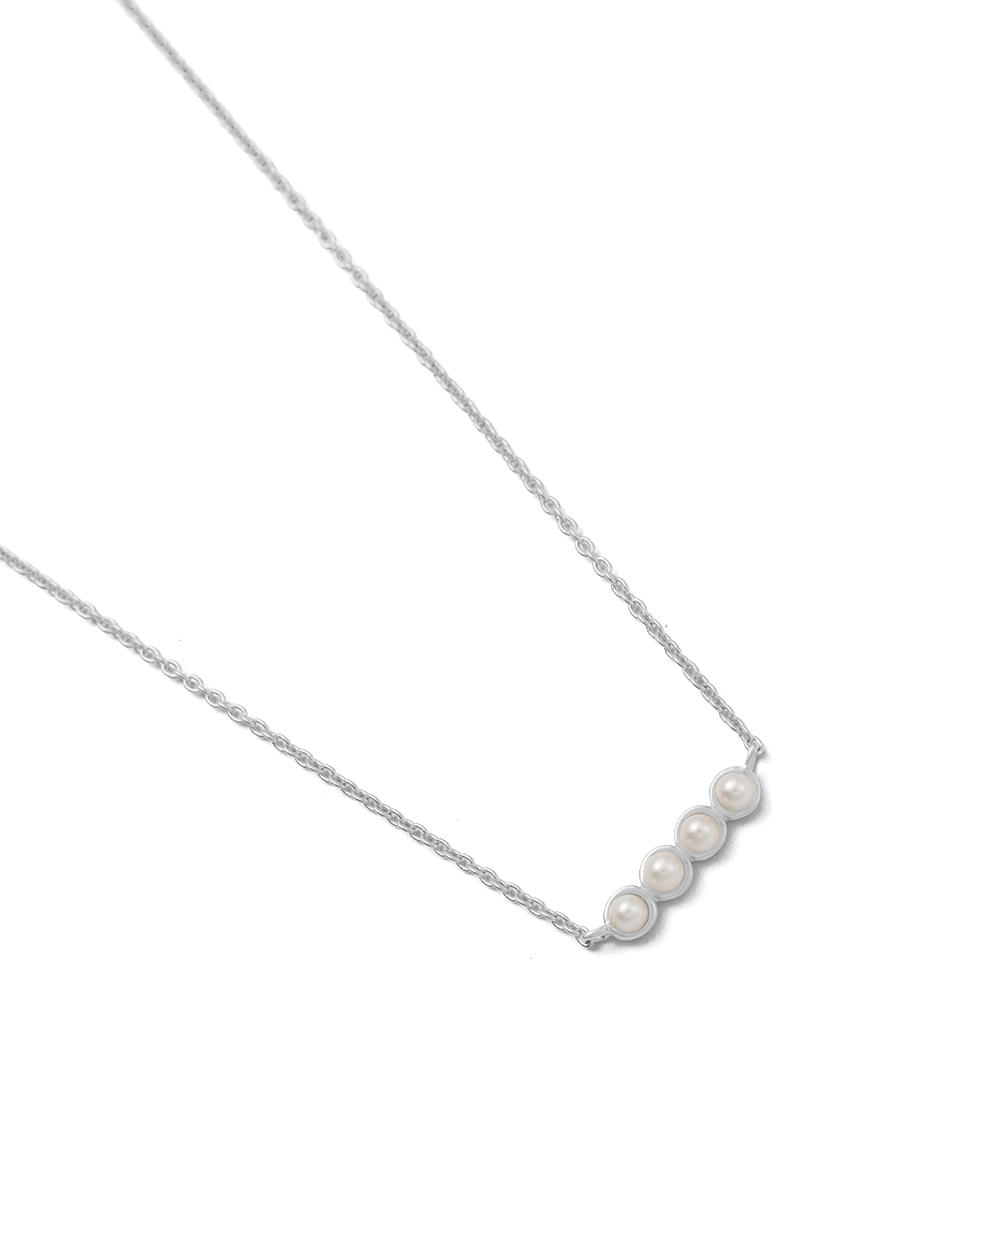 ALCHEMISE PEARL NECKLACE (STERLING SILVER)